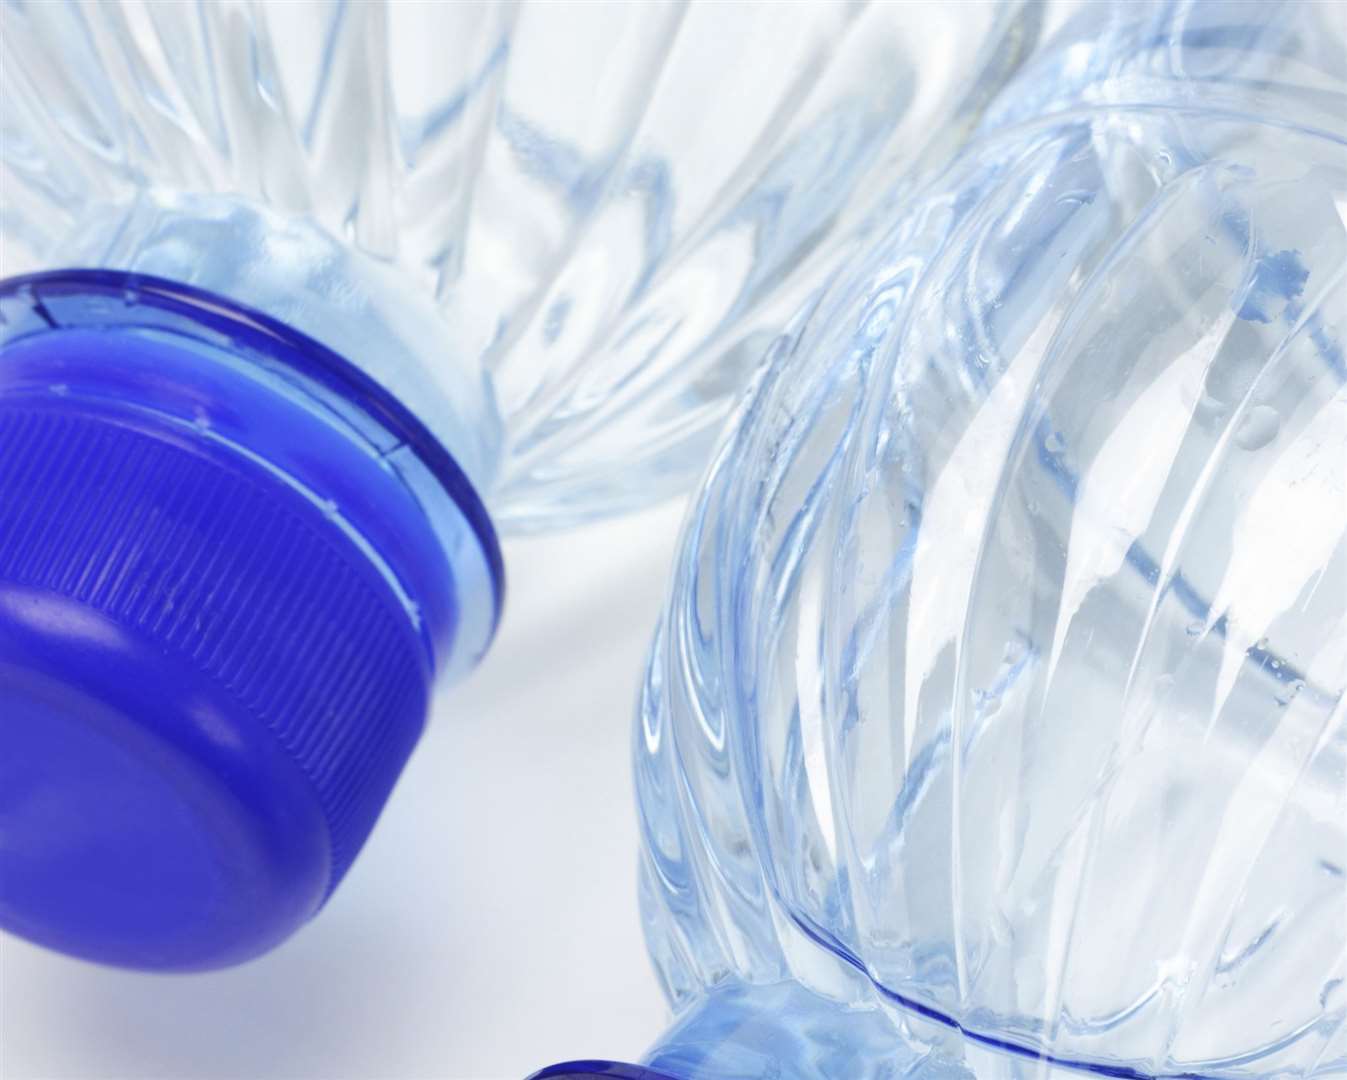 The Open 2020 is promoting the removal of single use plastics and will allow spectators to take in a re-usable flask Picture: Thinkstock